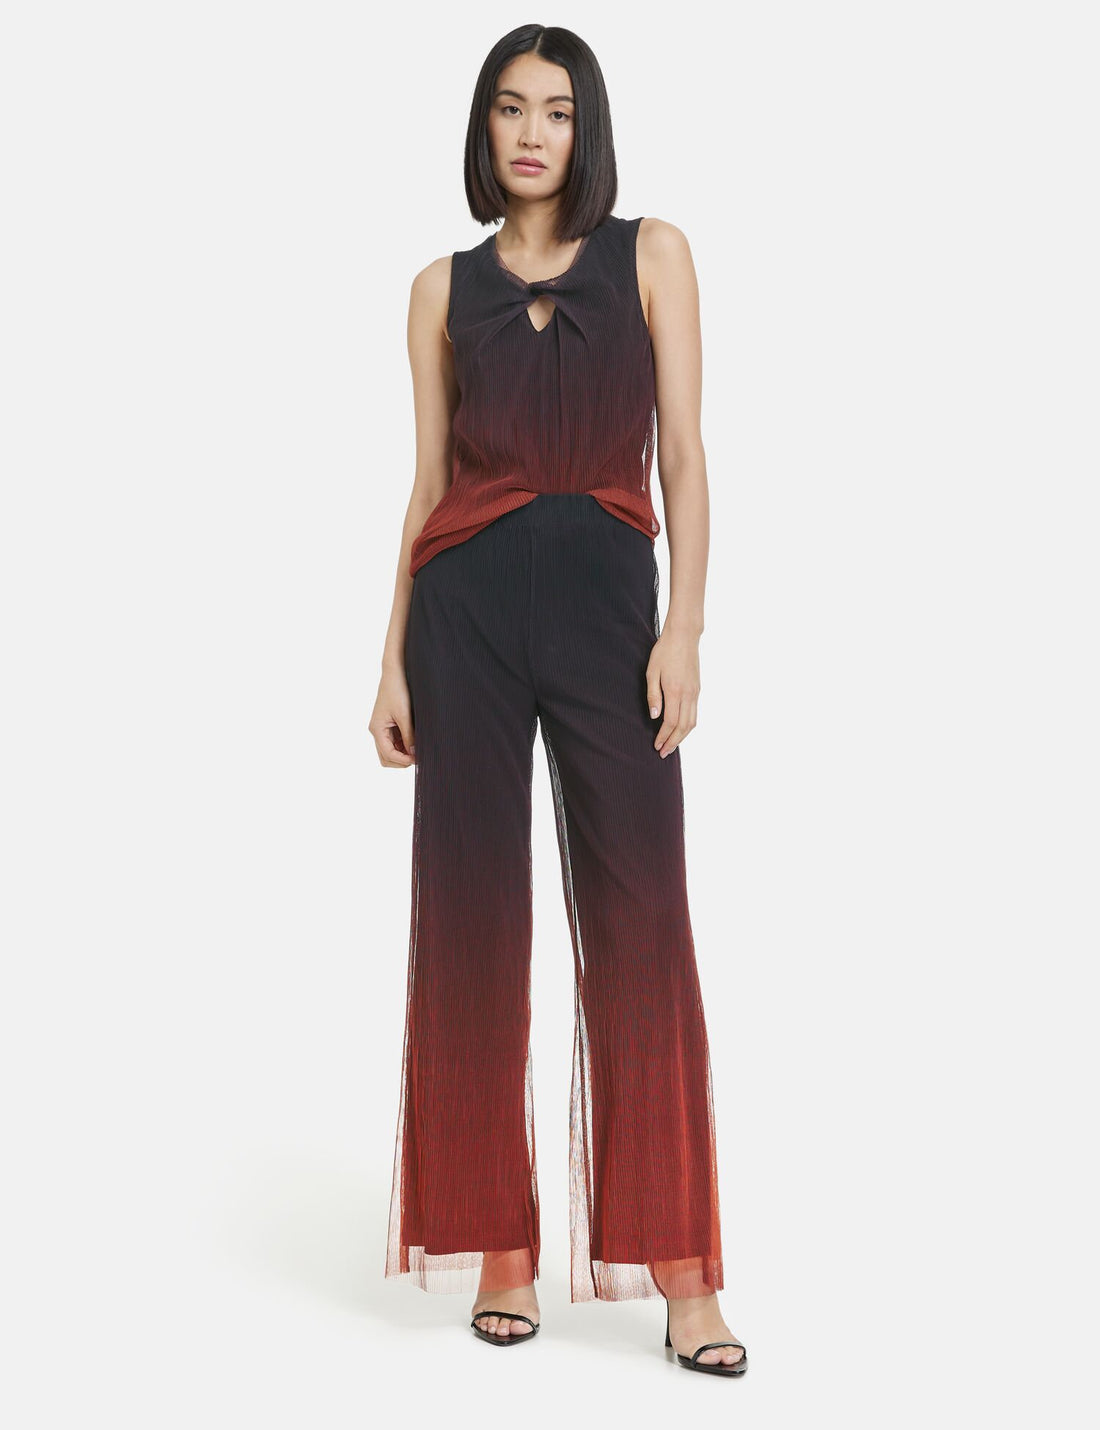 Pleated Trousers With Colour Graduation_521302-16237_1102_01